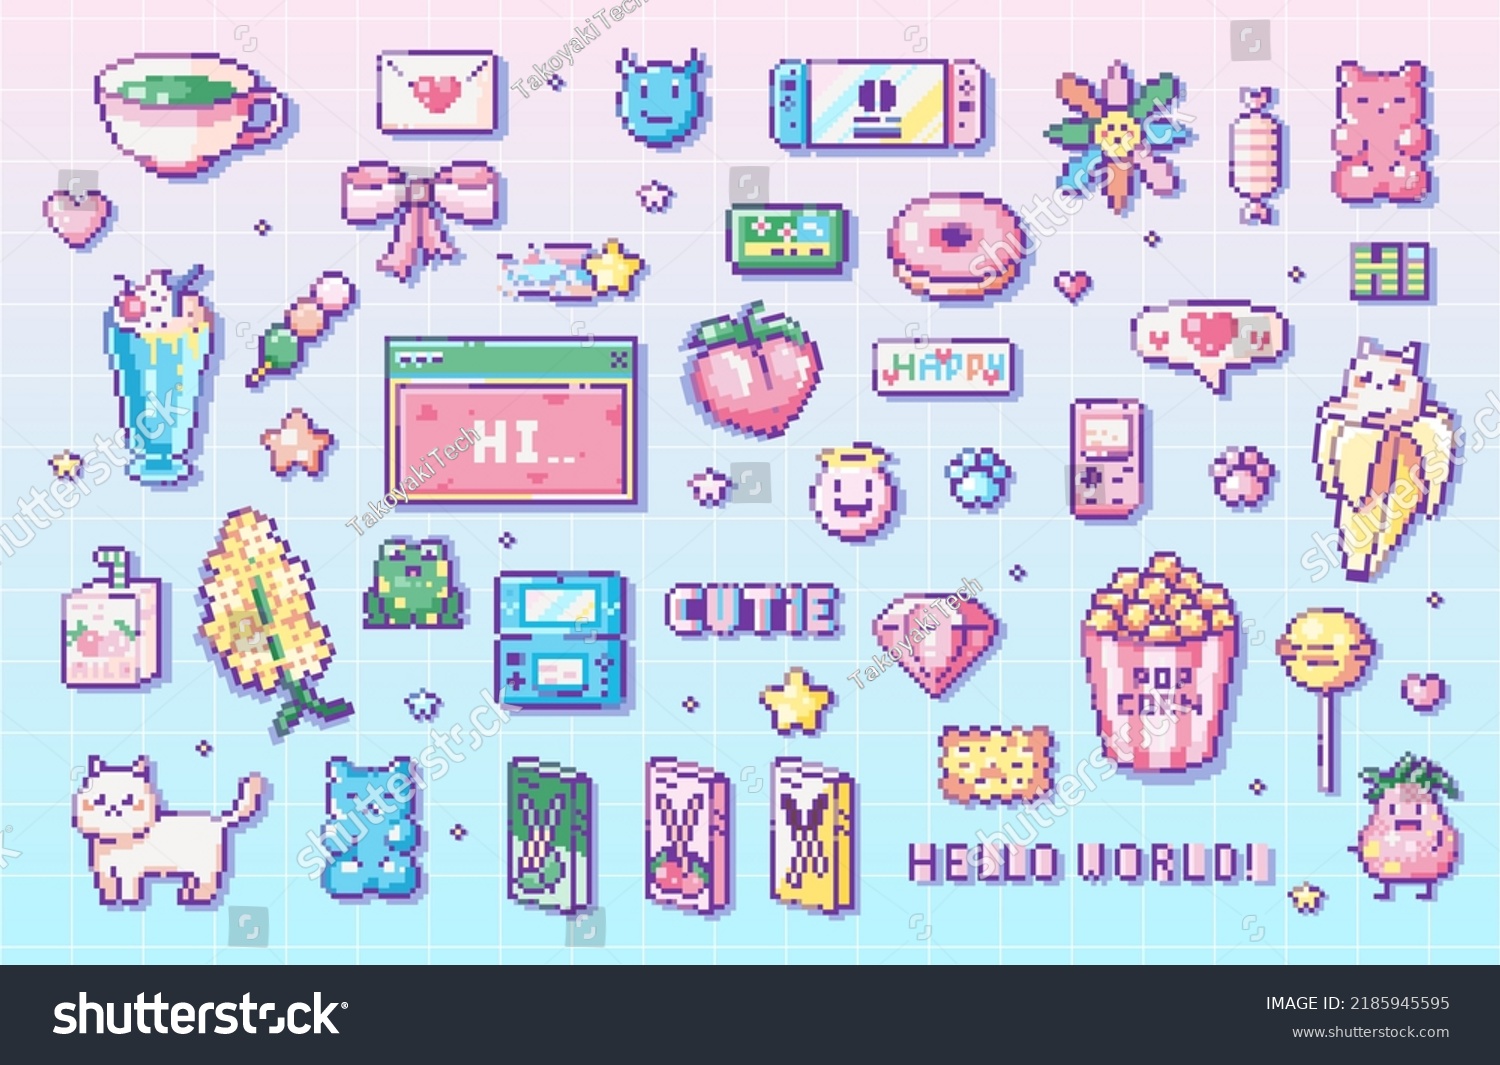 SVG of Pixel art Cute gaming clip art pack. 8 bit vintage video game style decorations set like snacks, sweets, console, handheld pocket games, animals and decorative elements. Vector cute pixel art stickers svg